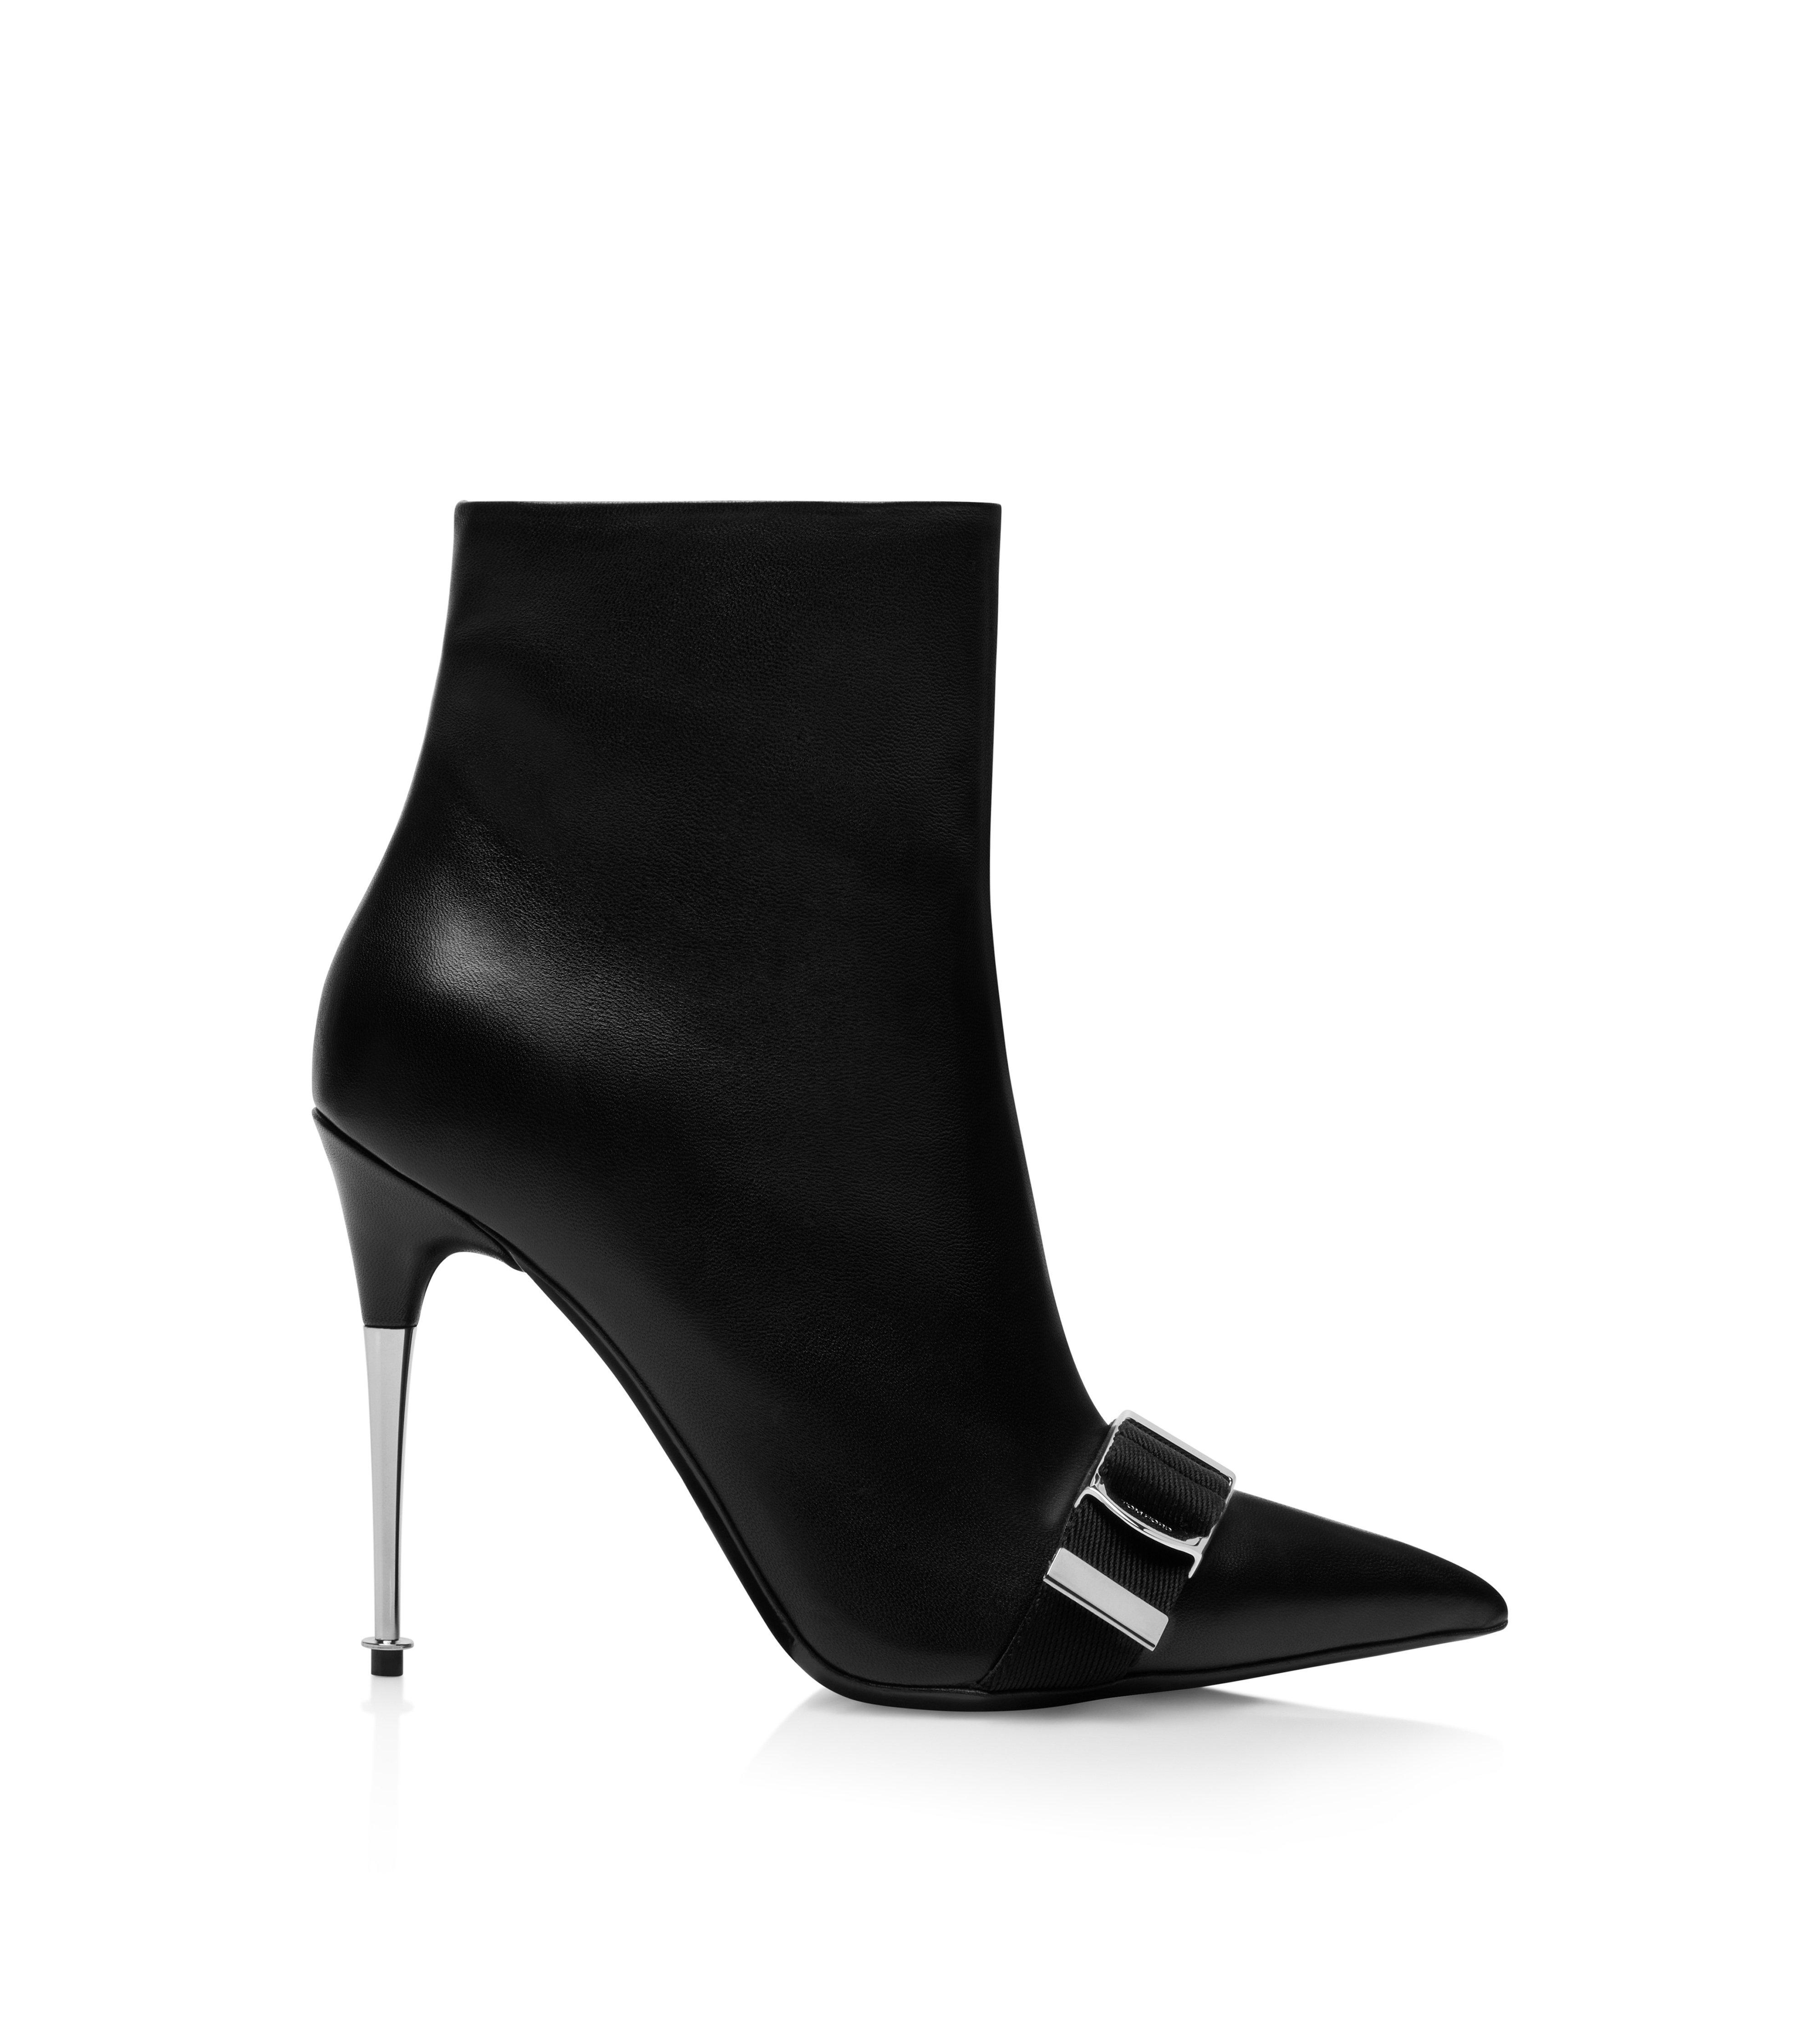 Boots Women's Shoes | TomFord.com